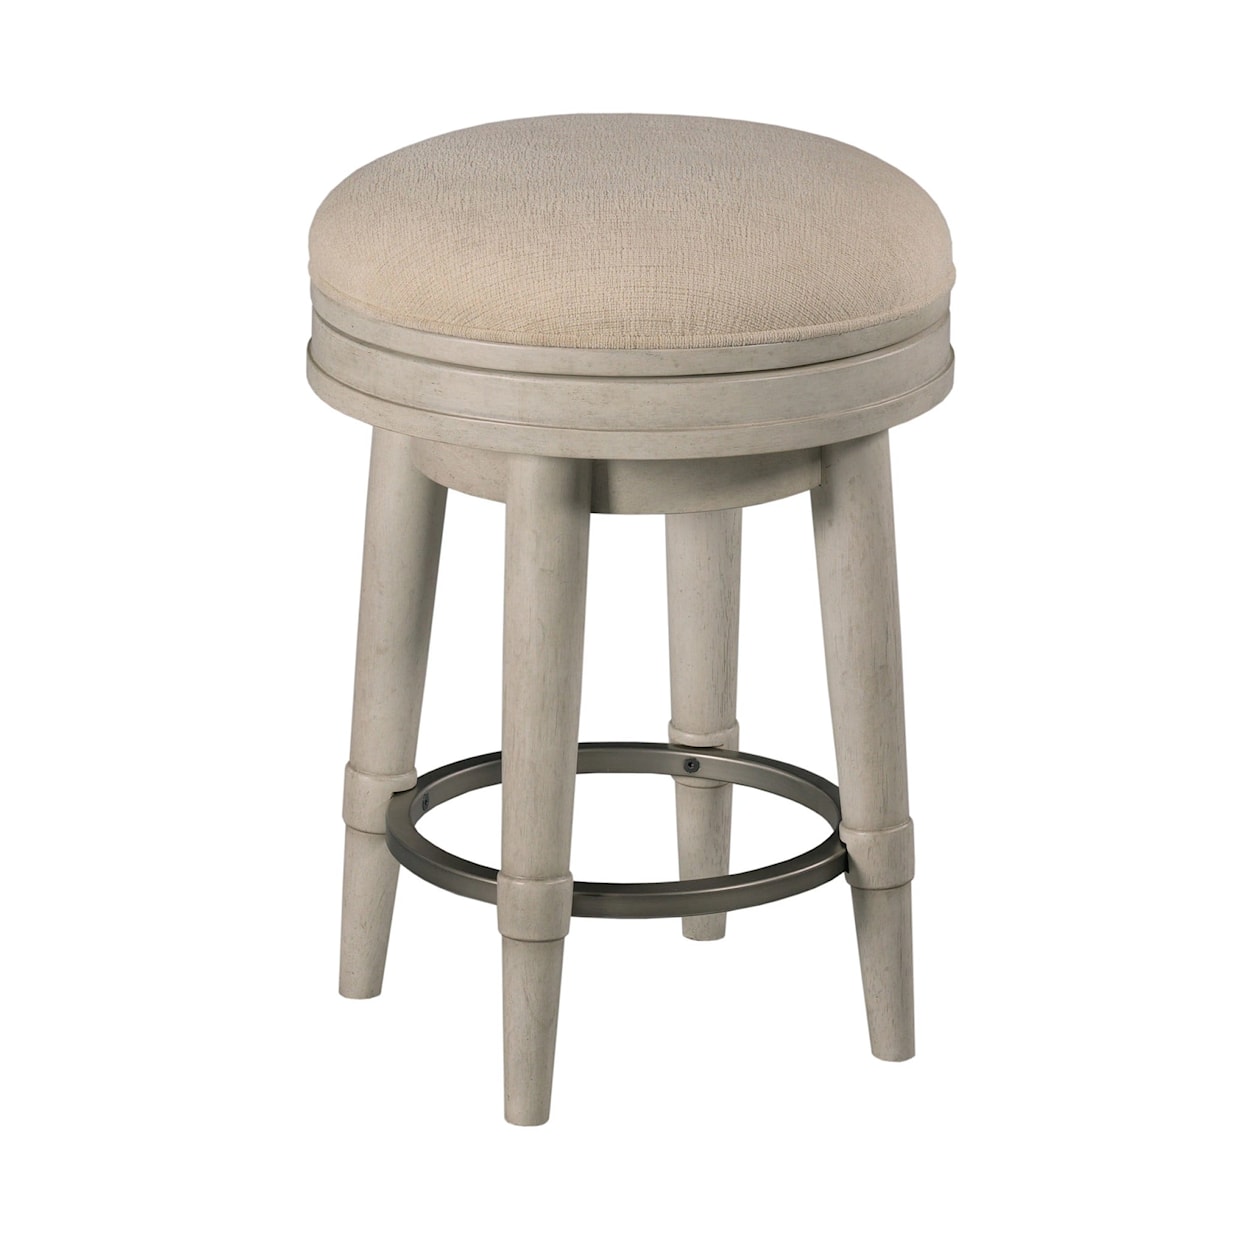 Hammary Domaine Counter-Height Upholstered Swivel Stool